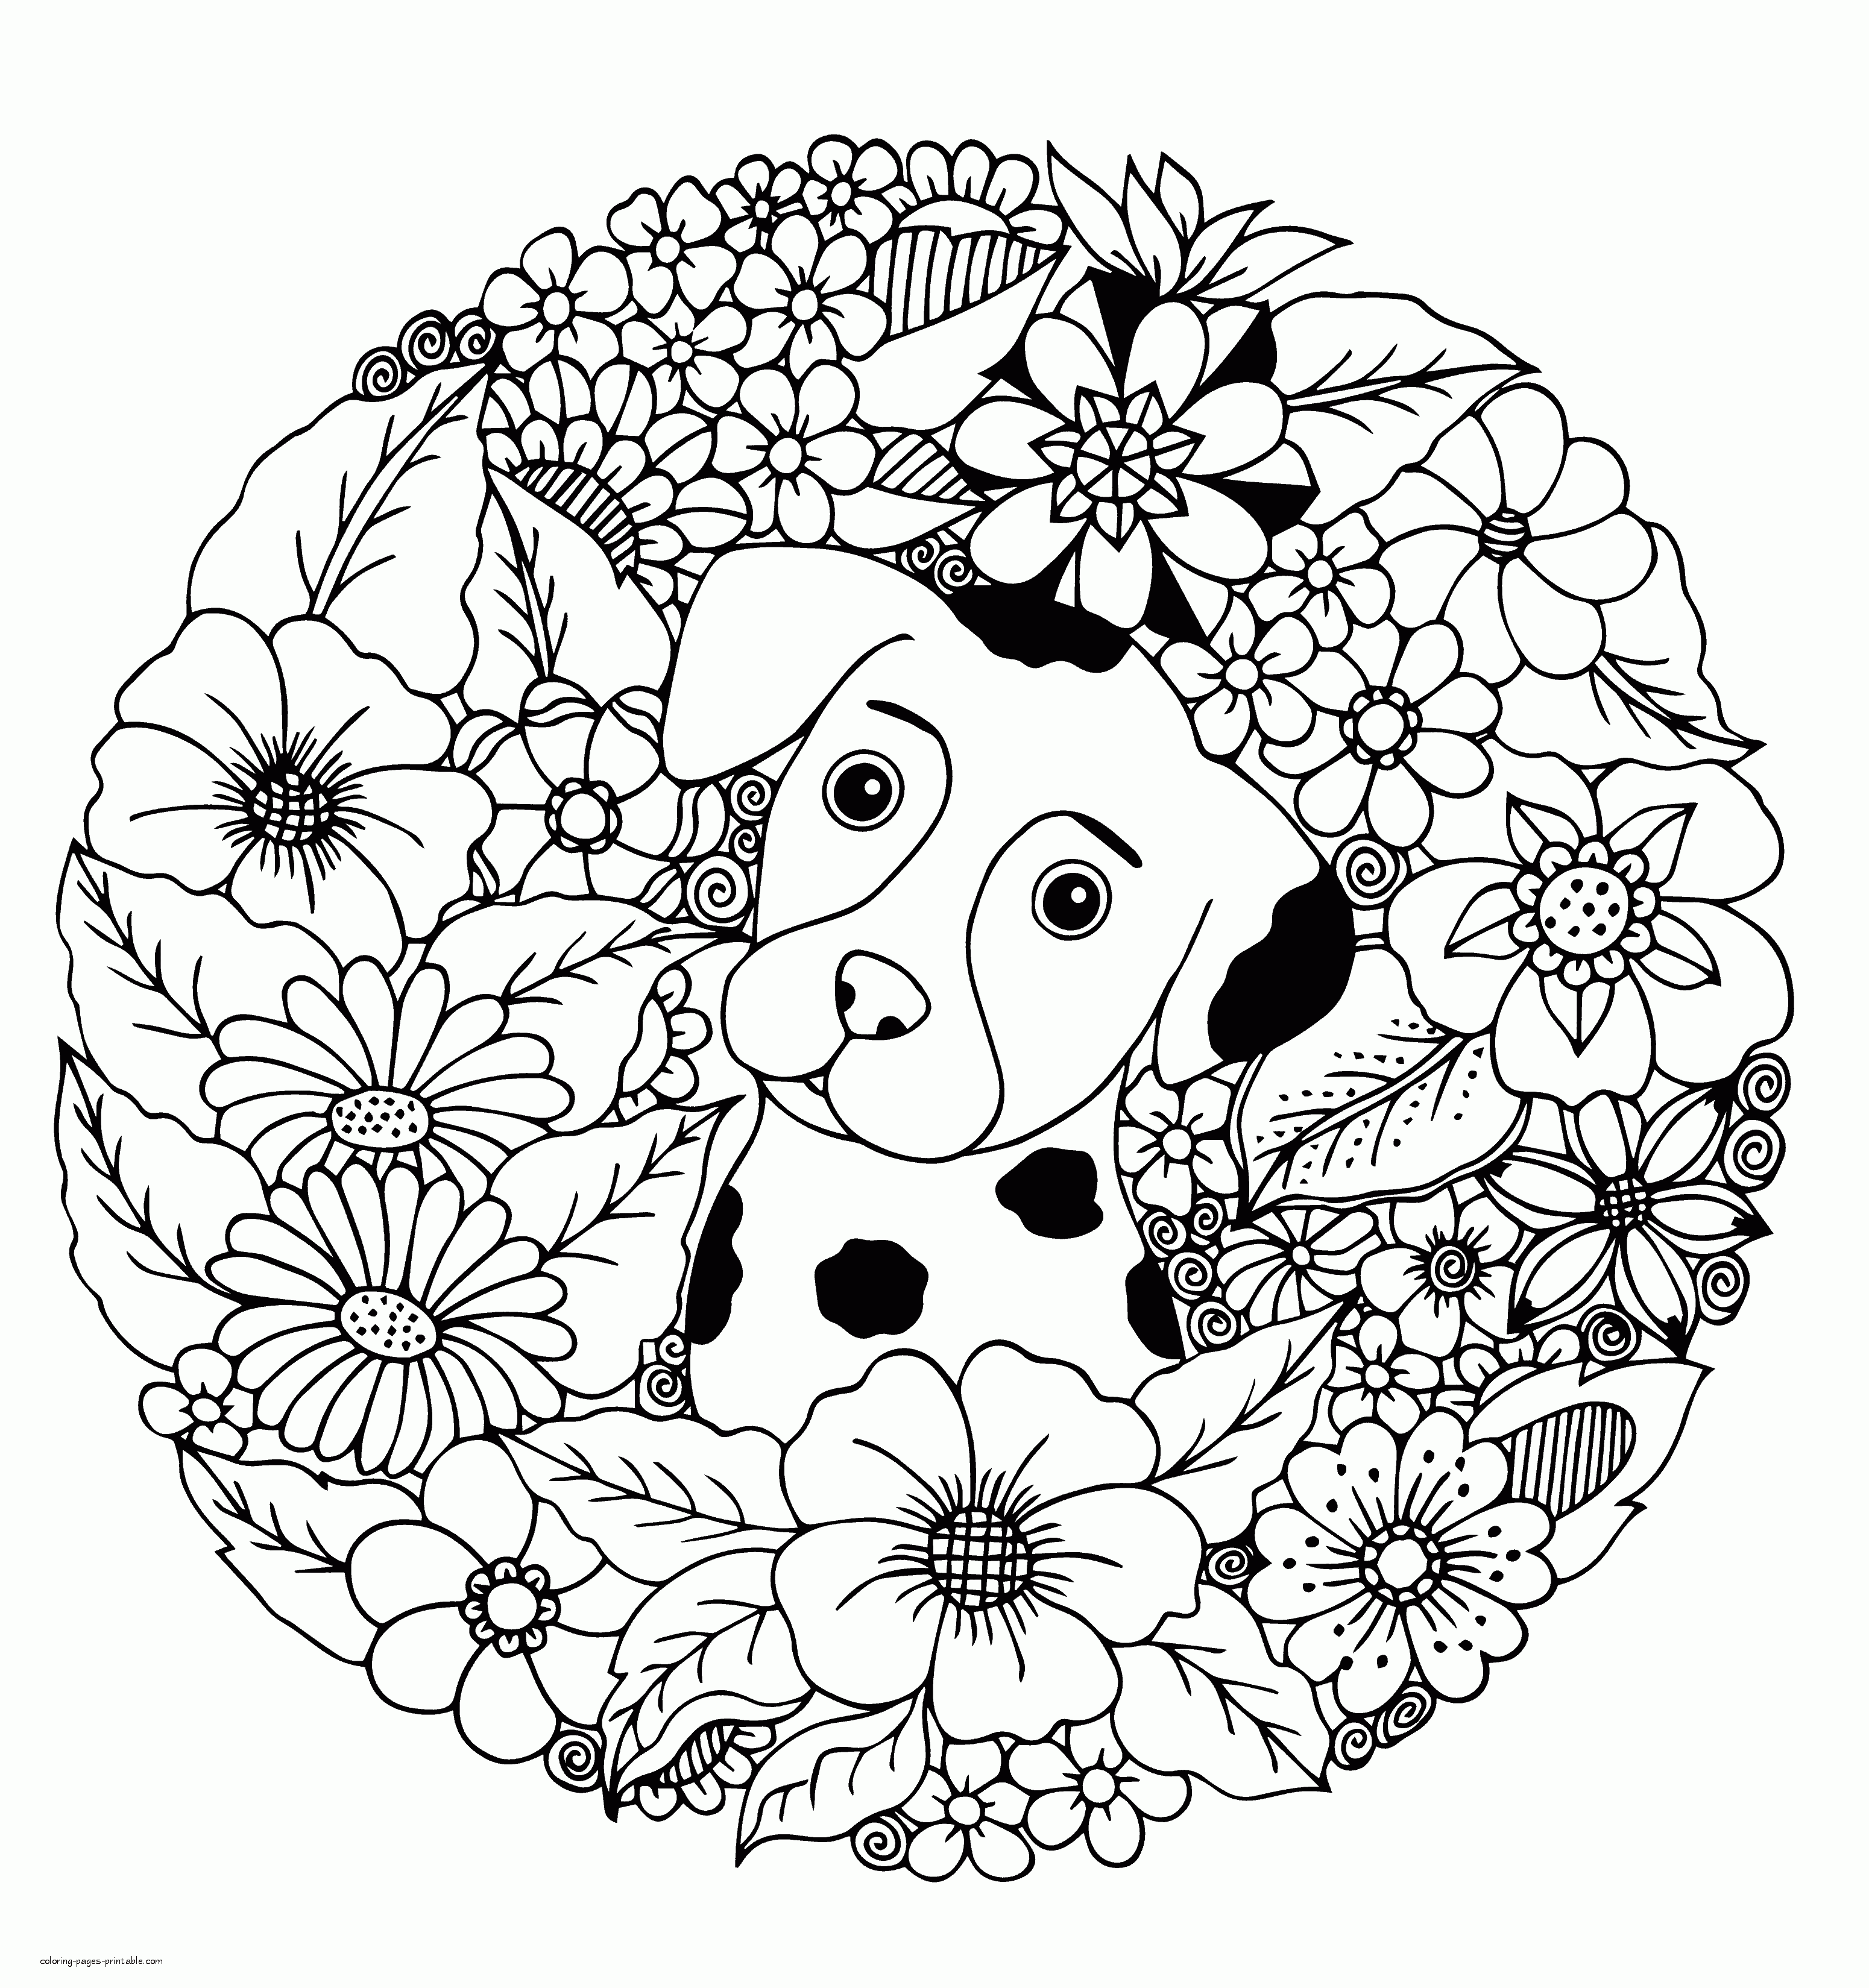 Download Puppy Coloring Pages For Adults Coloring Pages Printable Com